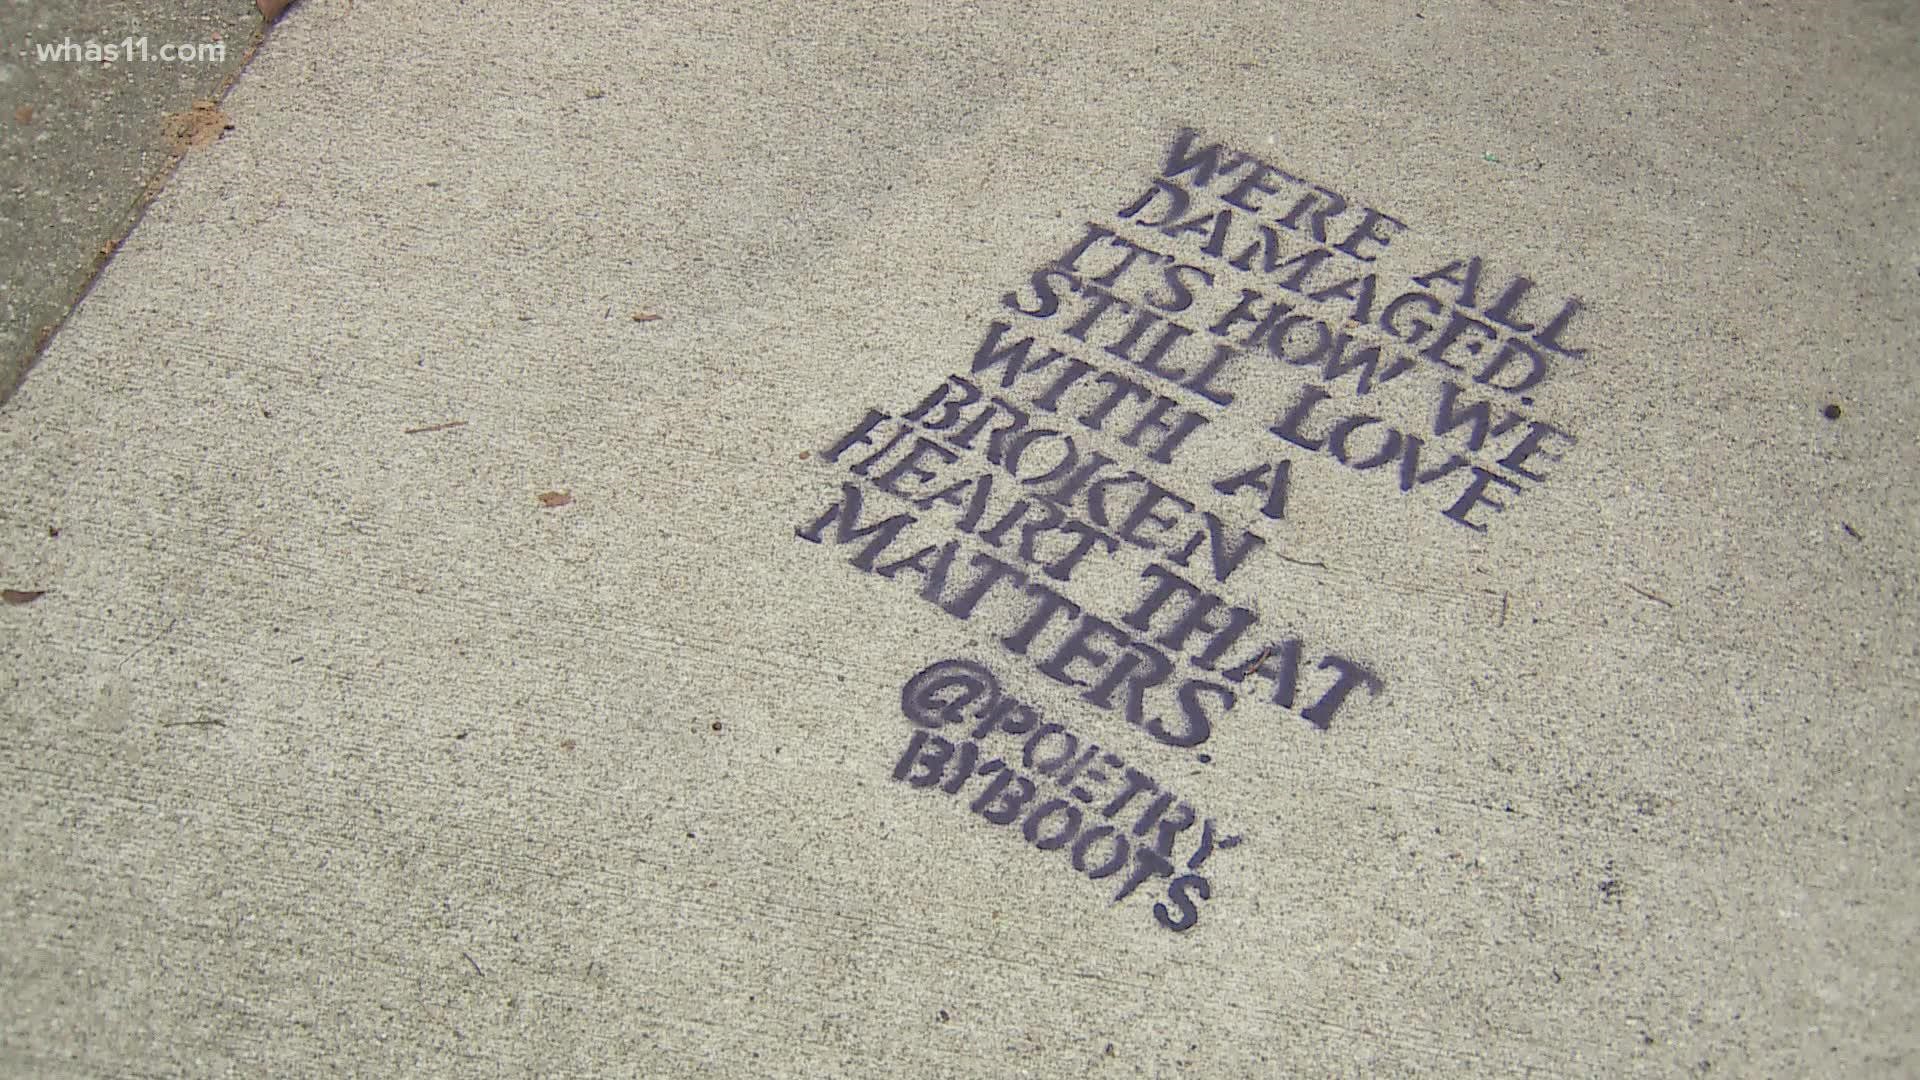 A poet who goes by the name of Boots has shared her inspiring messages in cities across the country, including Louisville.